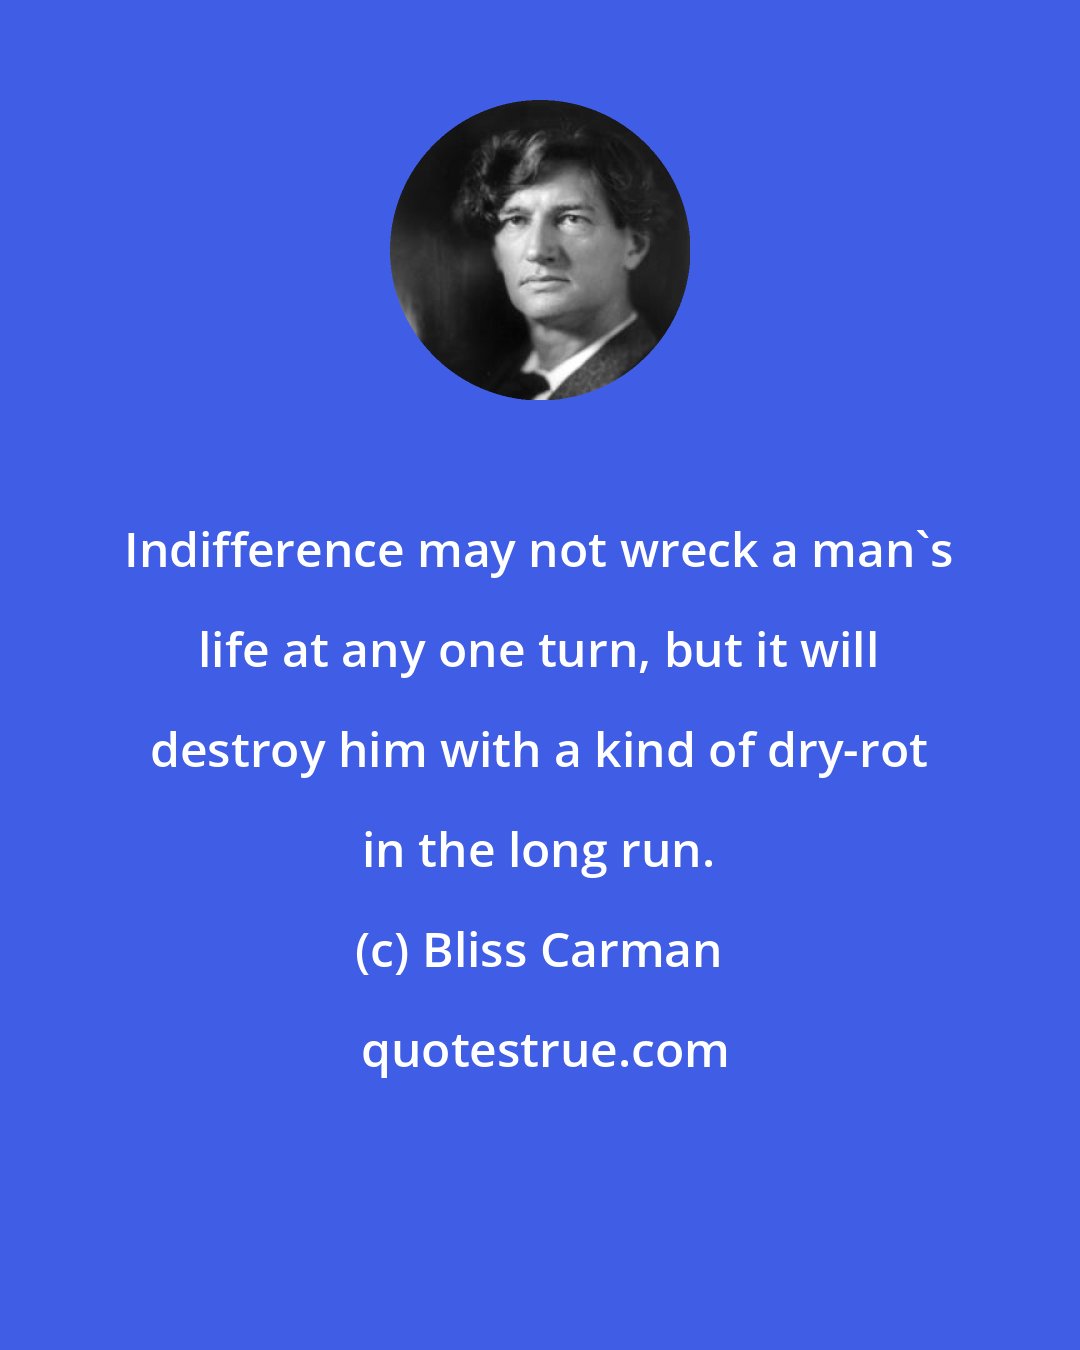 Bliss Carman: Indifference may not wreck a man's life at any one turn, but it will destroy him with a kind of dry-rot in the long run.